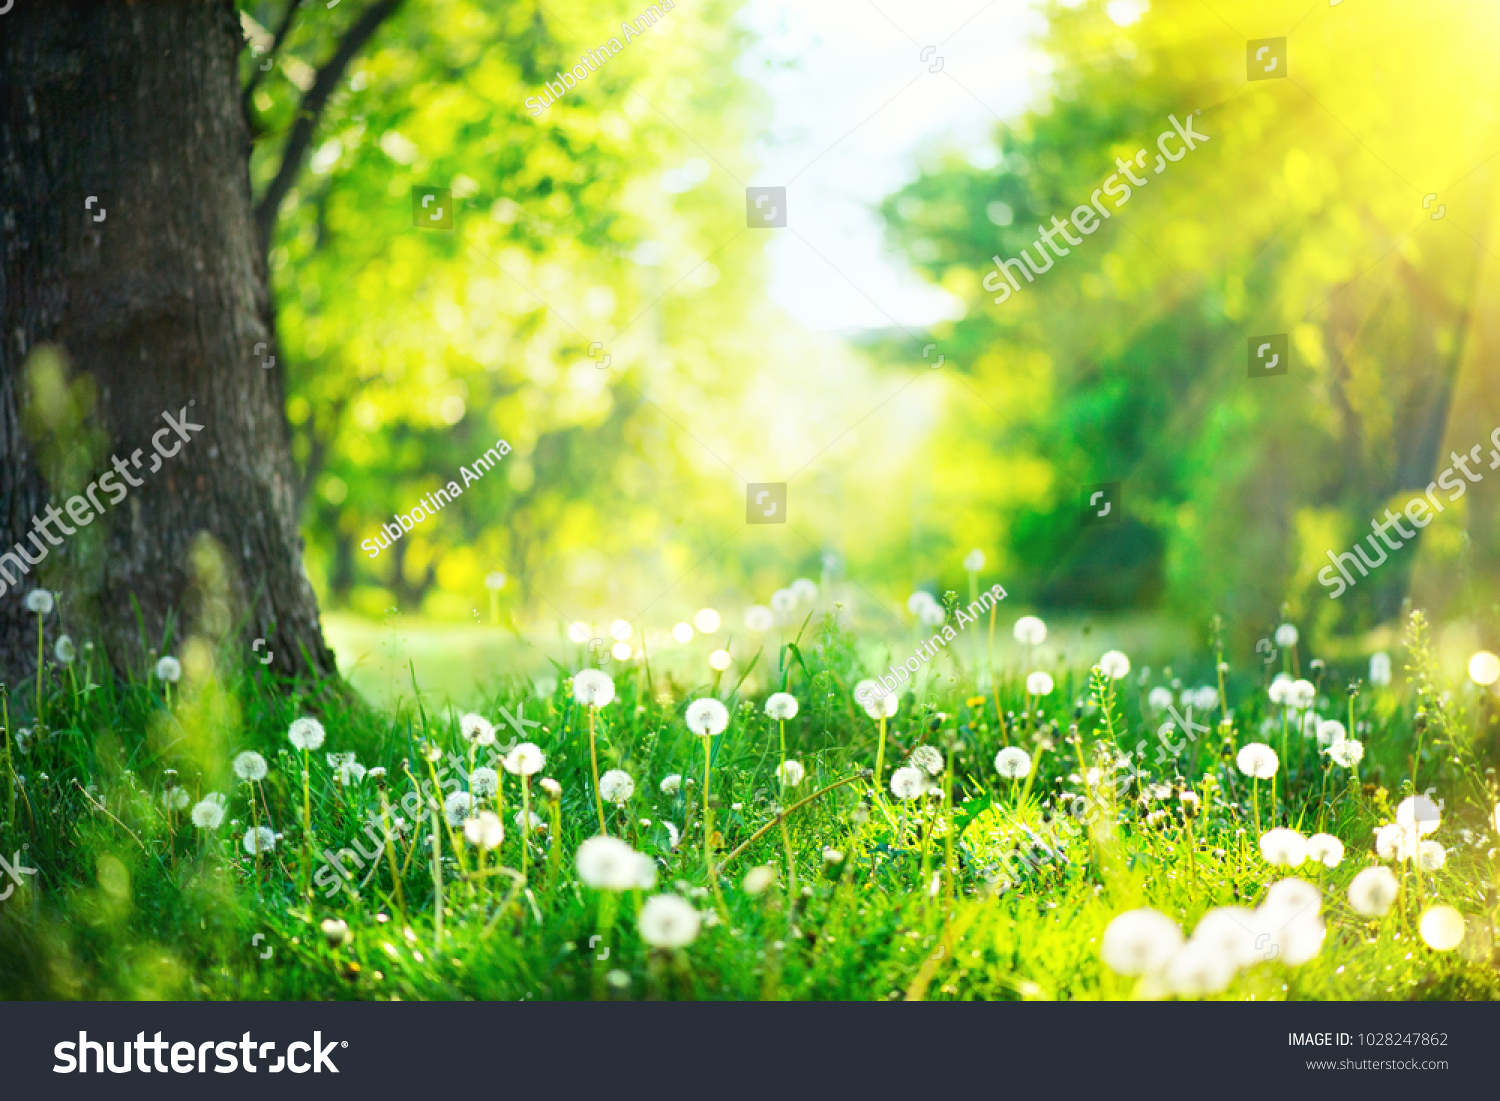 Spring Nature scene. Beautiful Landscape. Park with dandelions, Green Grass, Trees and flowers. Tranquil Background, sunlight. Scenic beauty meadow backdrop #1028247862